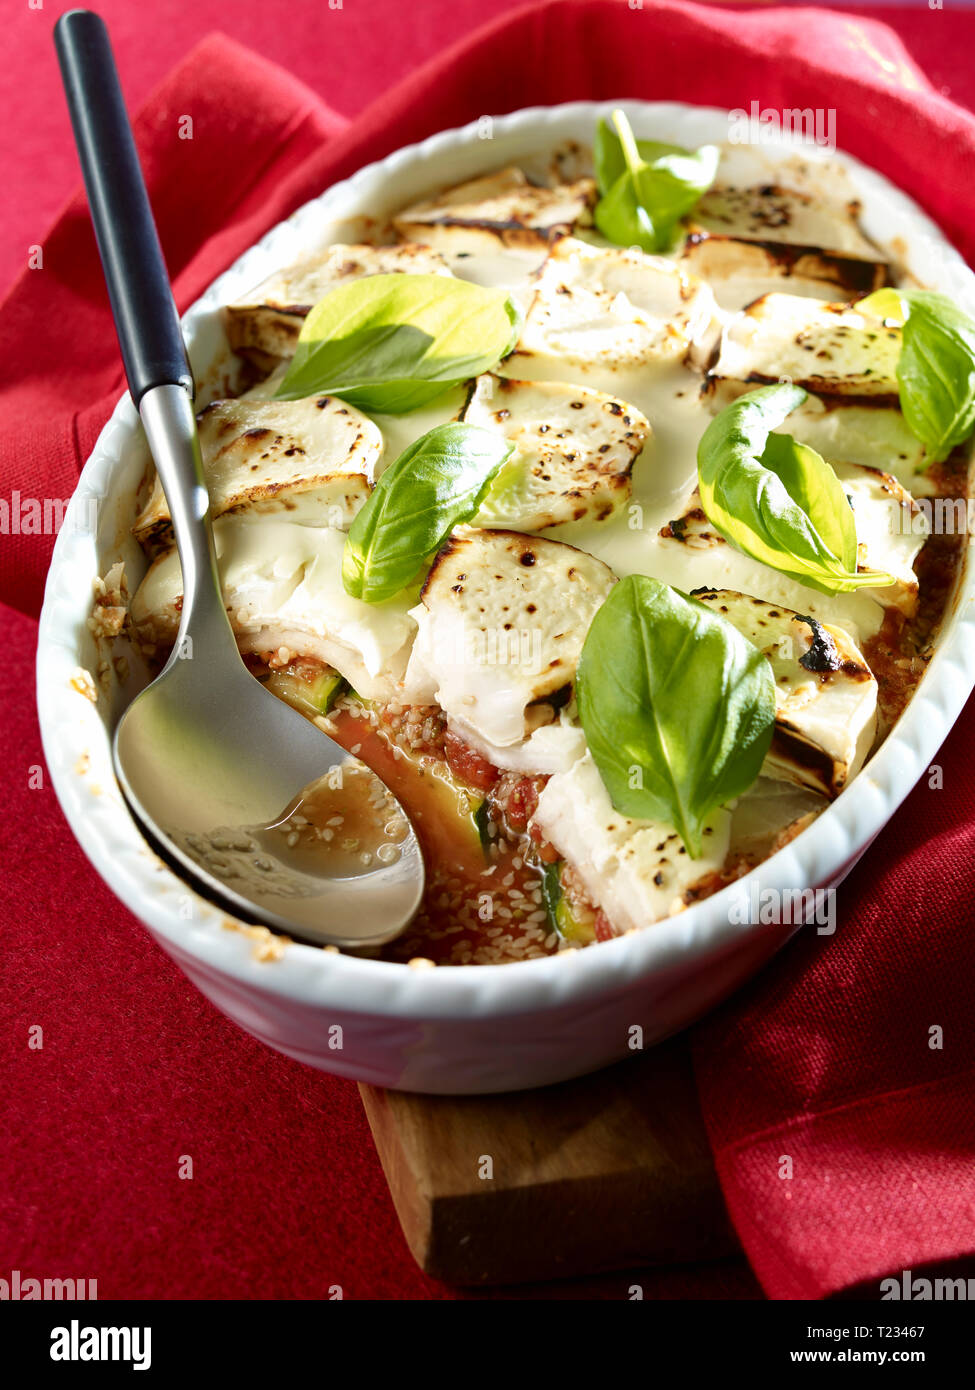 Courgette gratin with goat cheese, sesame in gratin dish, low carb Stock Photo